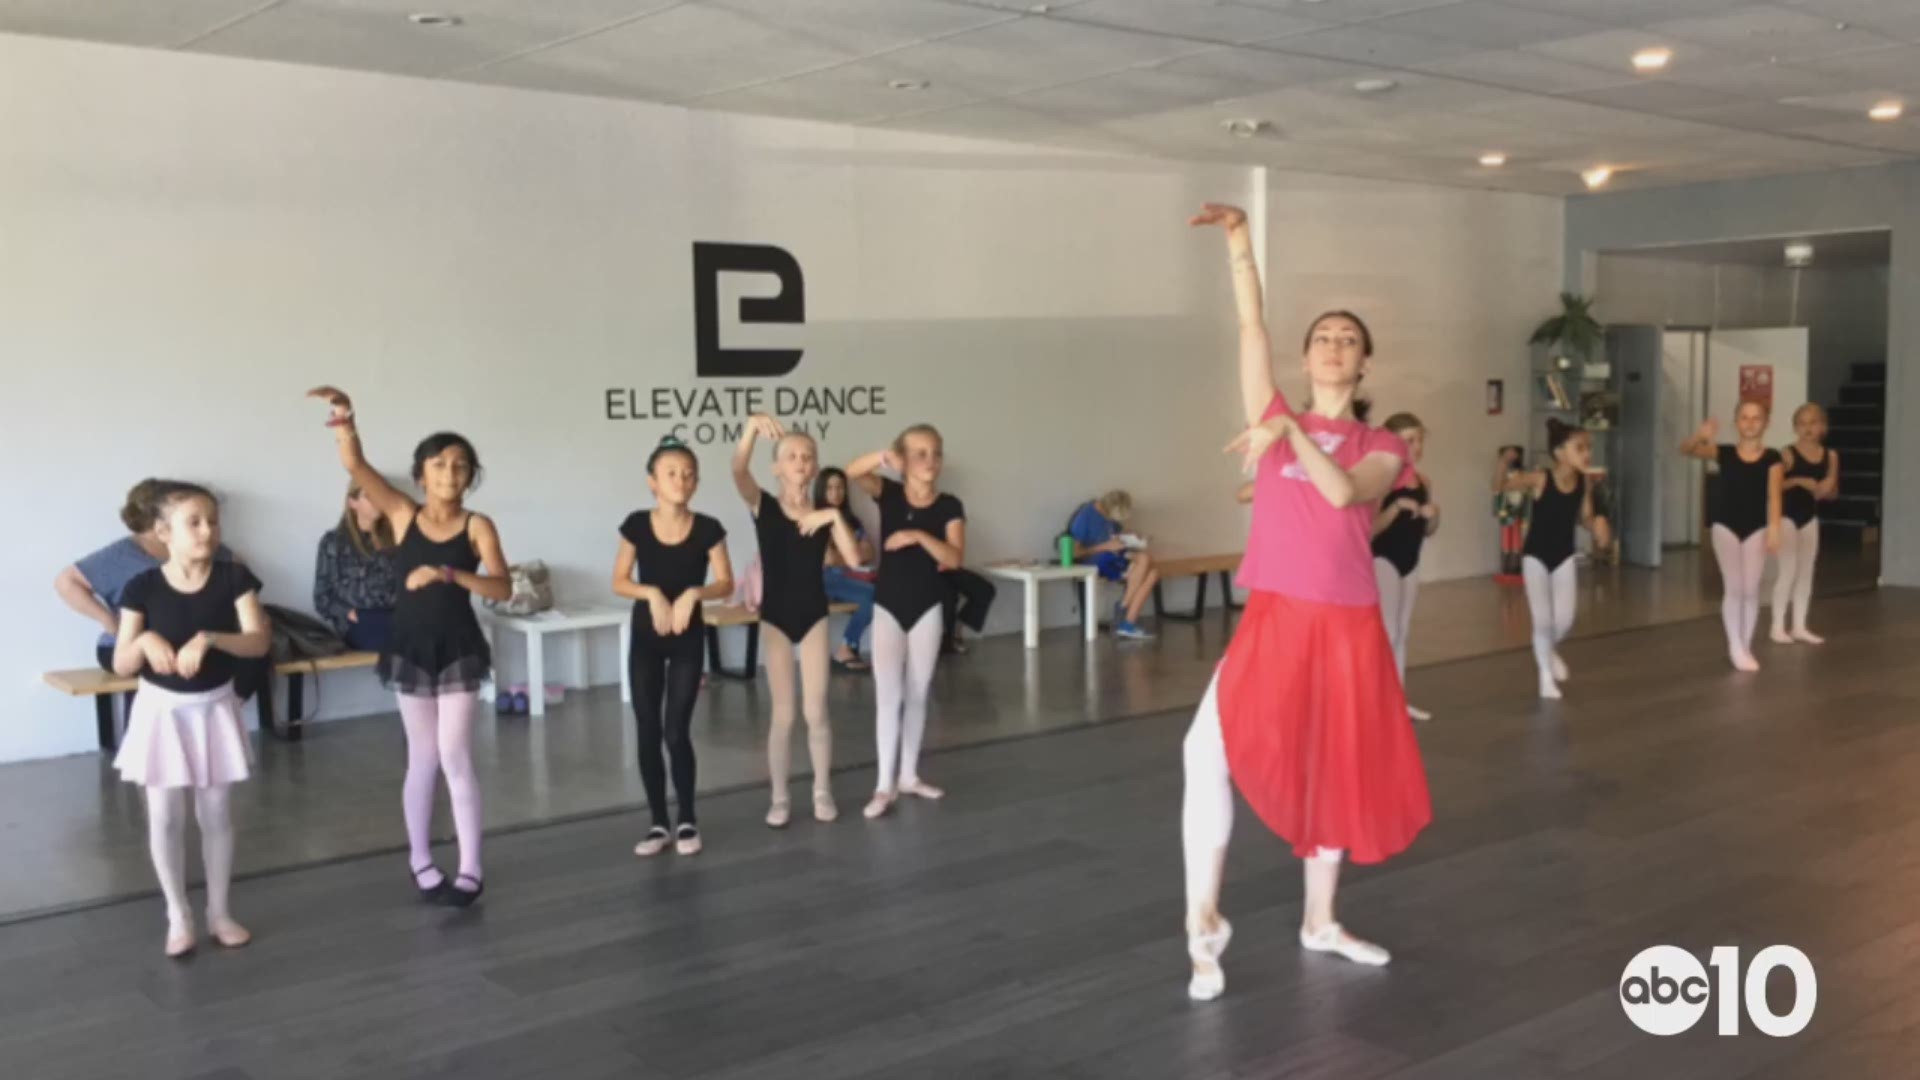 Young ballet students from Stockton will perform with the Moscow ballet in the holiday classic The Nutcracker on November 2 at Bob Hope Theatre in Stockton.